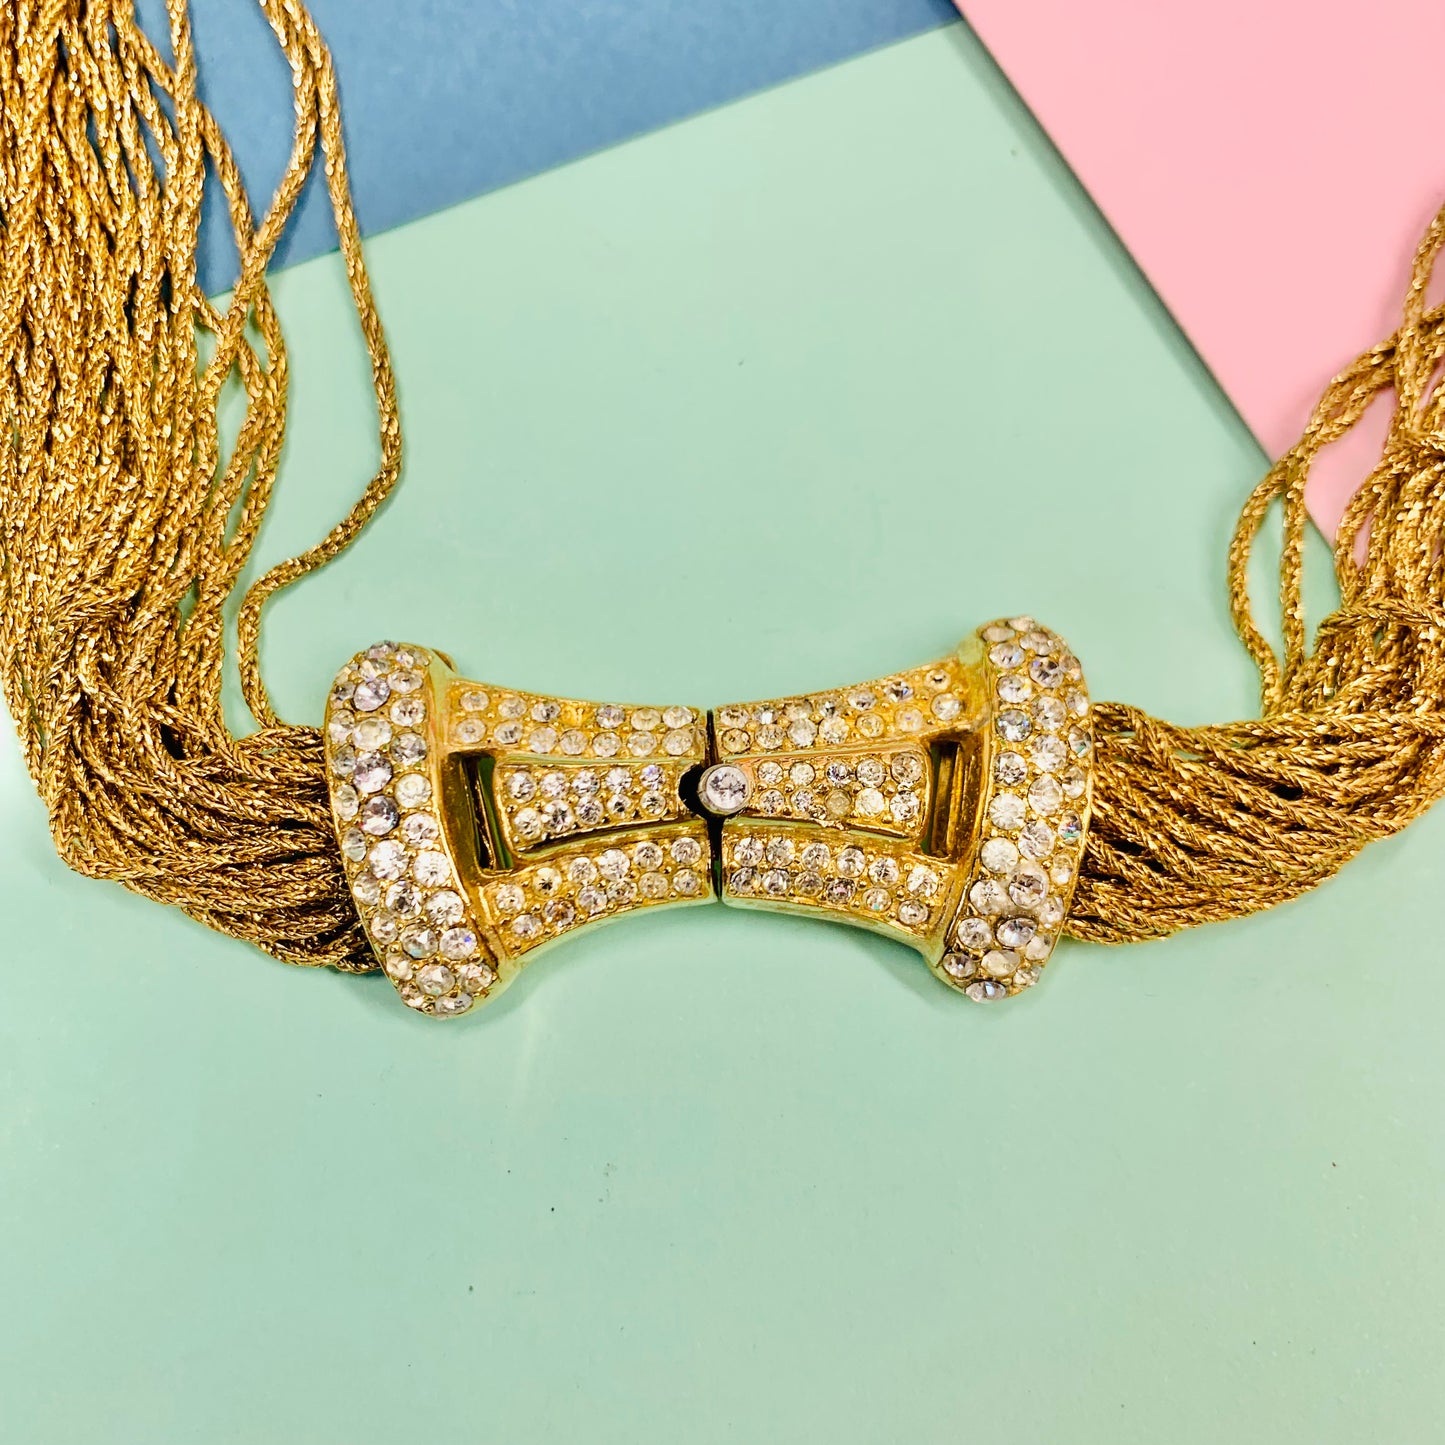 Extremely rare 1975 signed Christian Dior gold plated multi-strands statement necklace